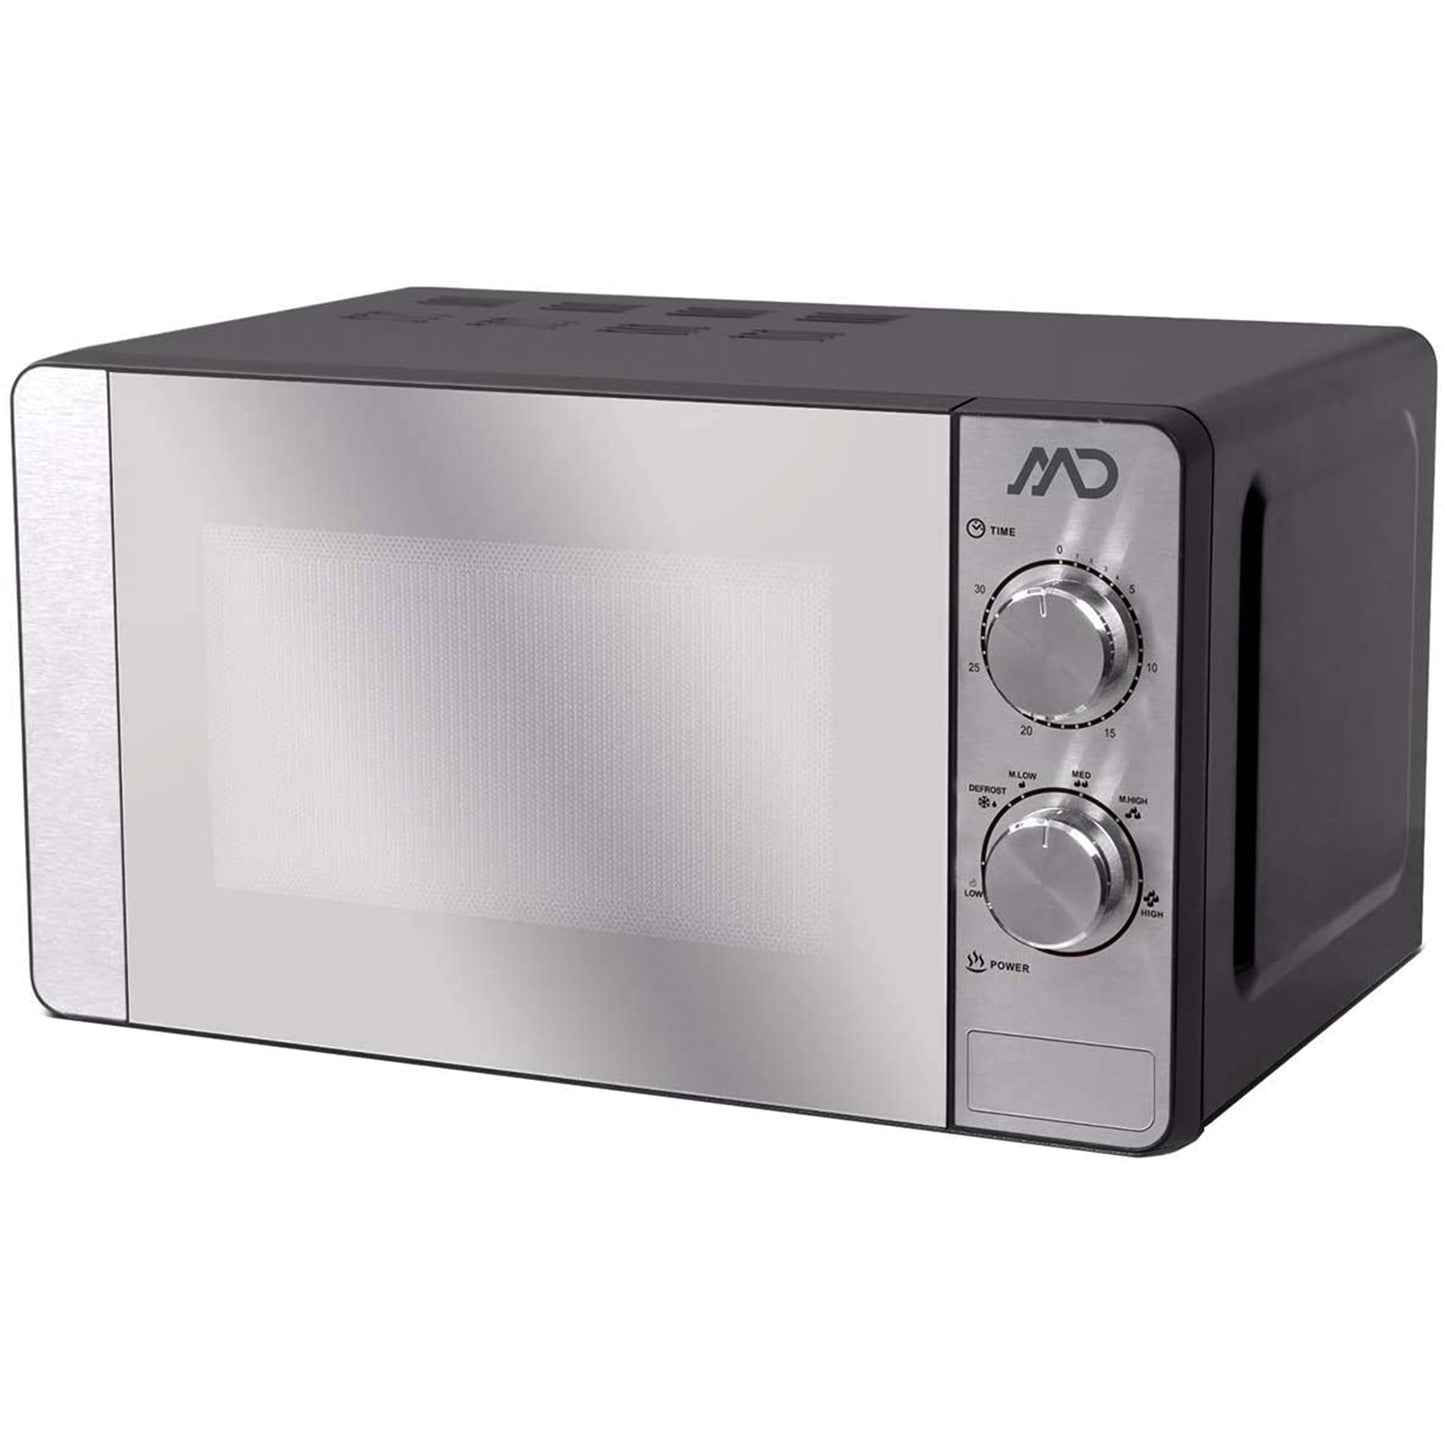 MD HOMELECTRO MMO-7710 Four micro-ondes 20L 700W 6 fonctions Porte miroir